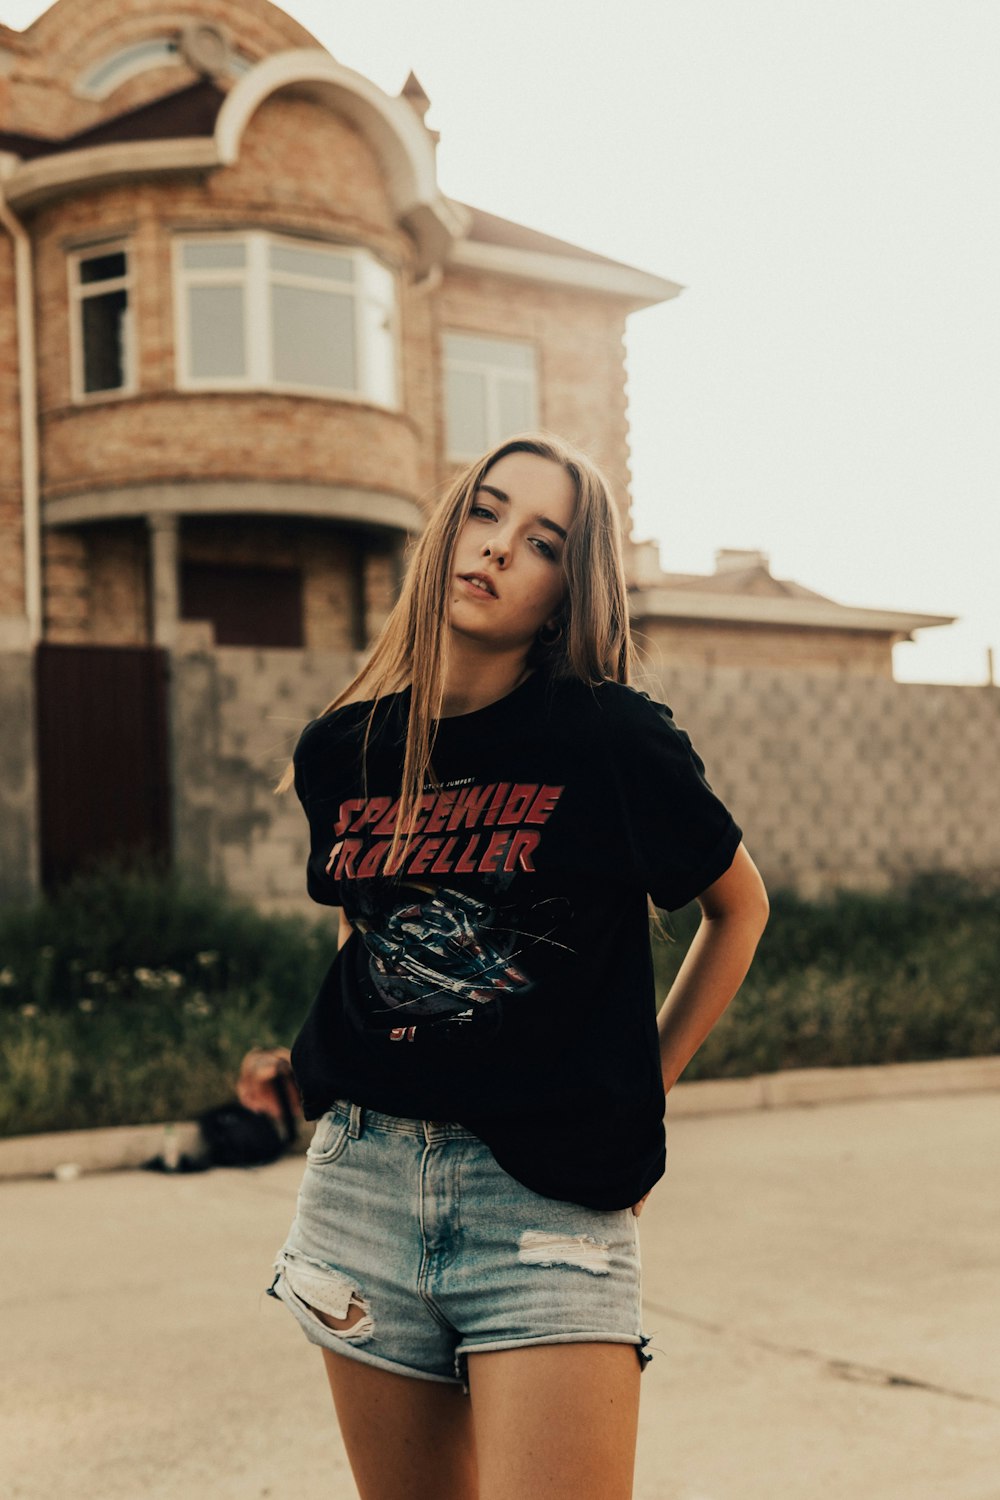 Woman in black crew neck t-shirt and blue denim shorts standing on street  during daytime photo – Free Apparel Image on Unsplash